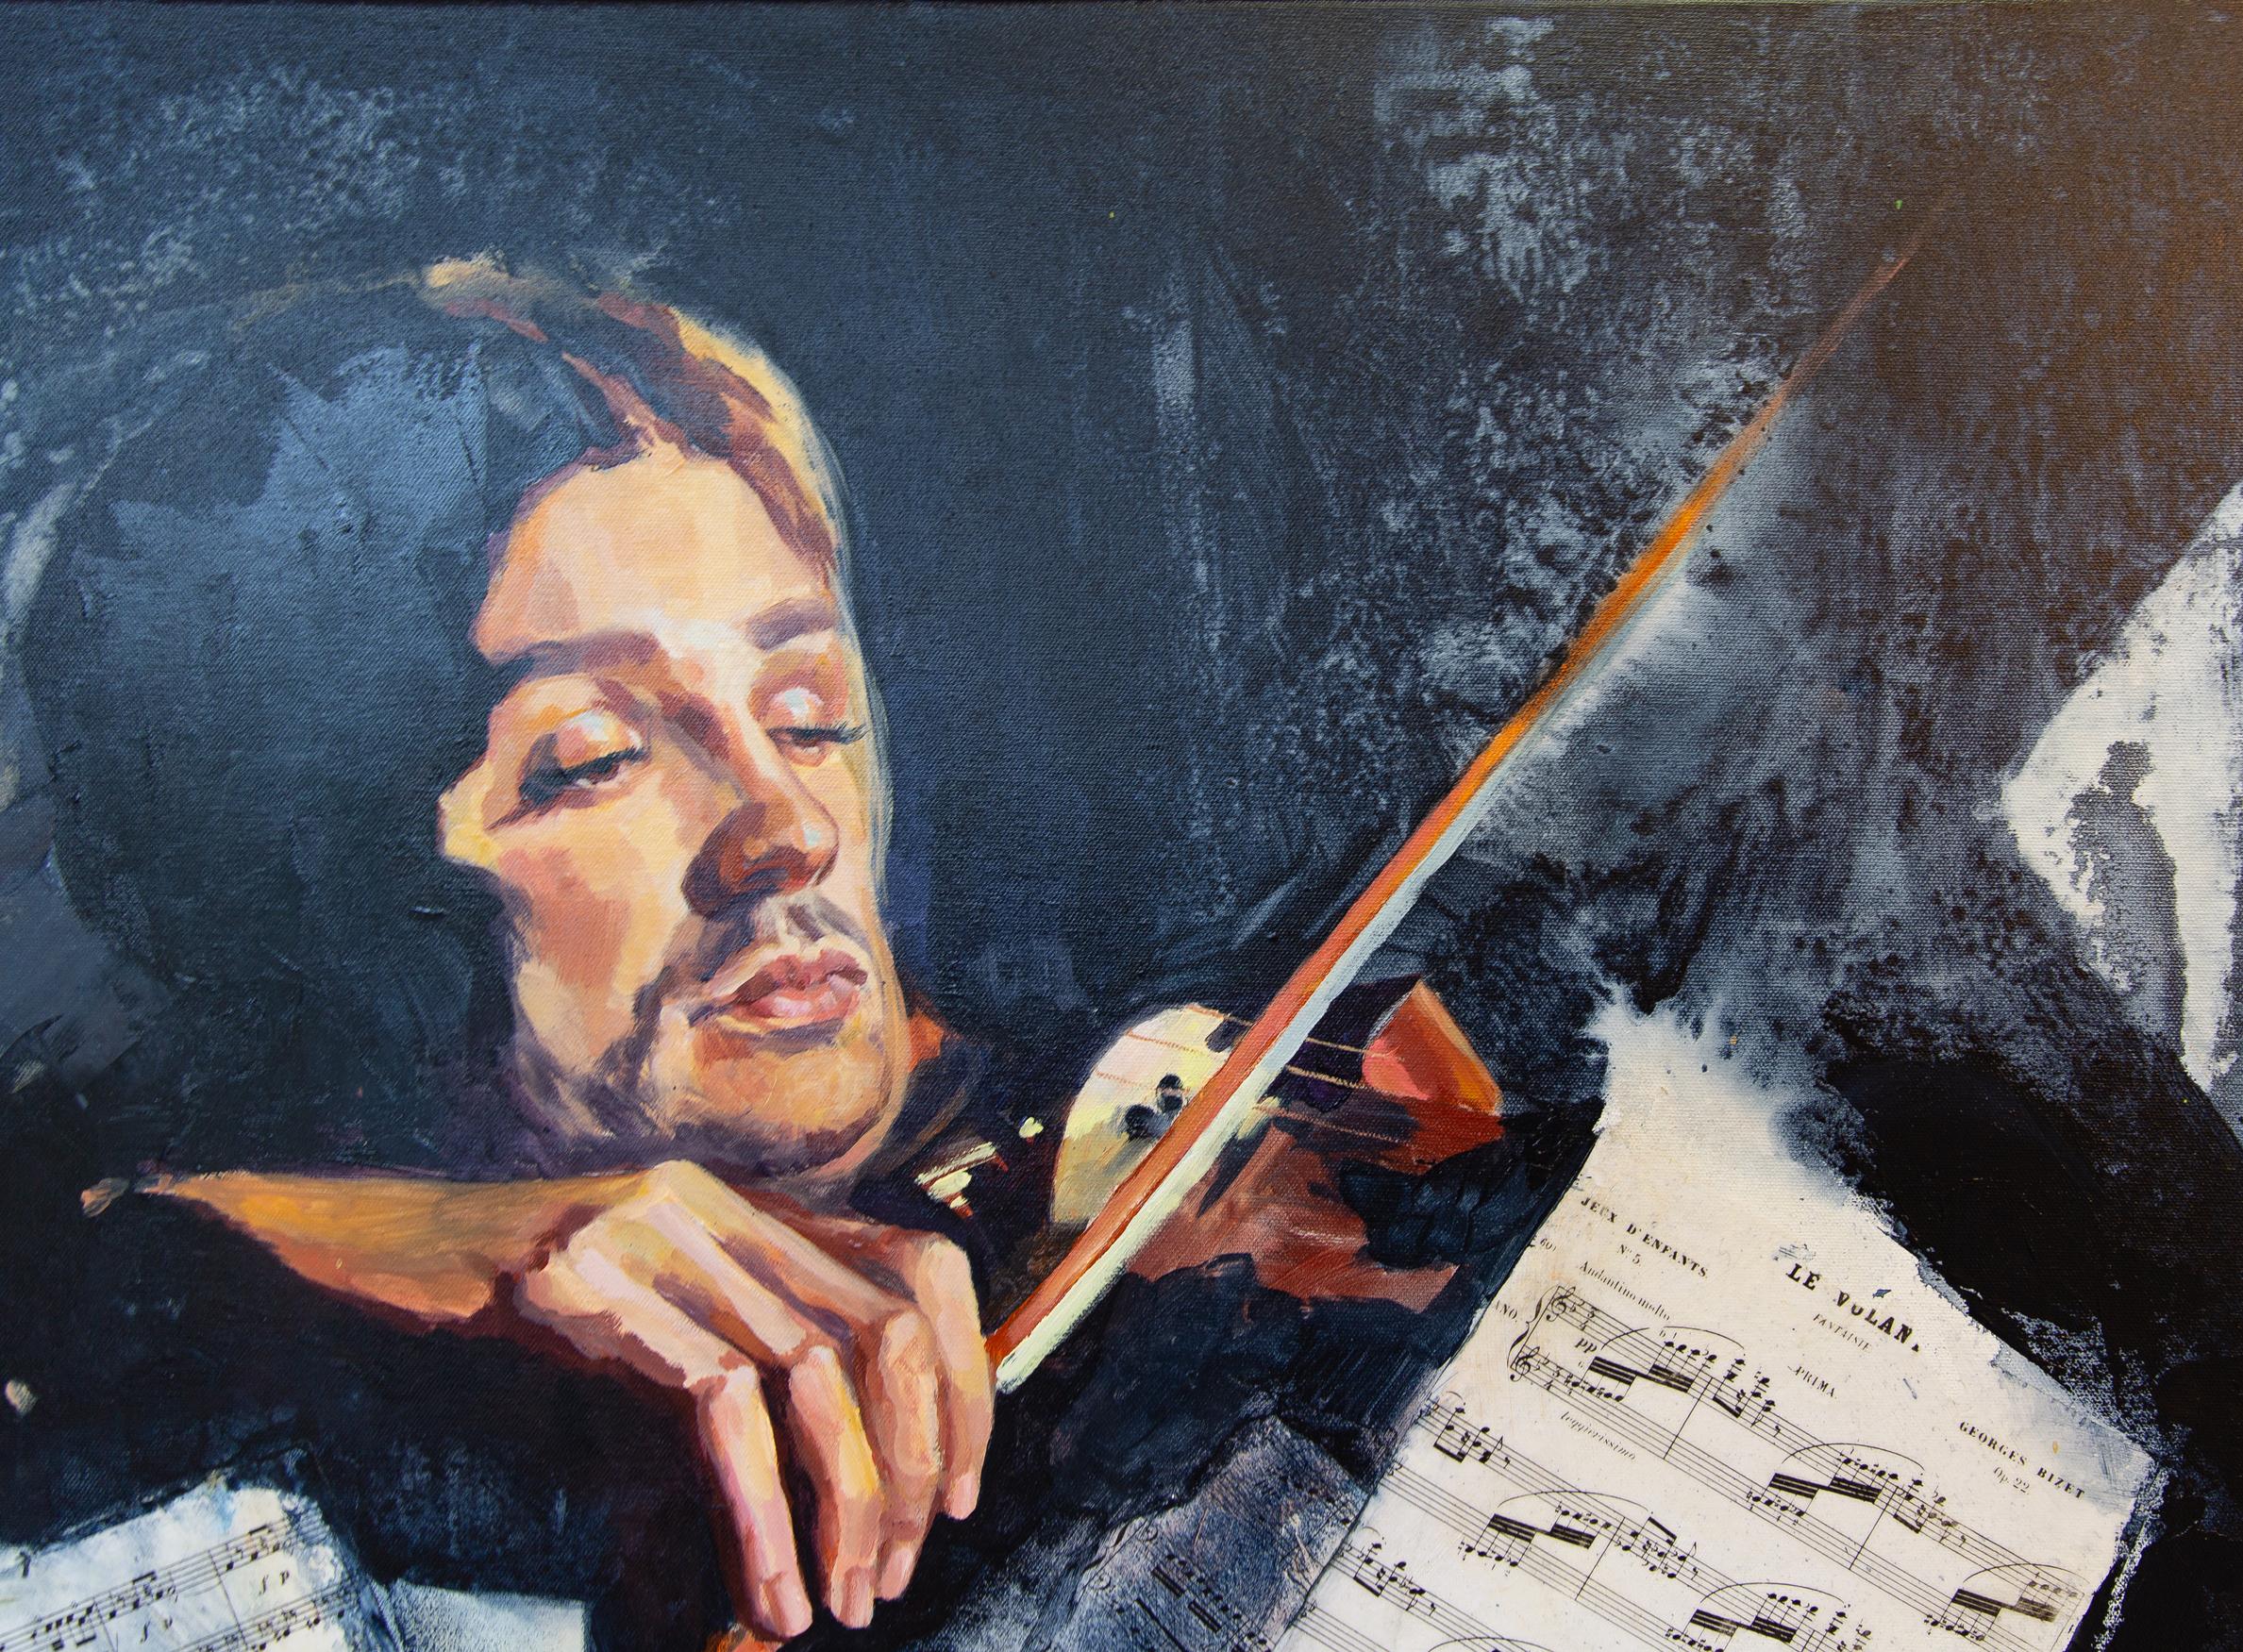 The painting “Violinist” was created in 2009, when the career of the world famous pianist David Garrett was just beginning. I saw in the magazine his small photograph from a concert. I was struck by his emotionality and unusual appearance. I came up